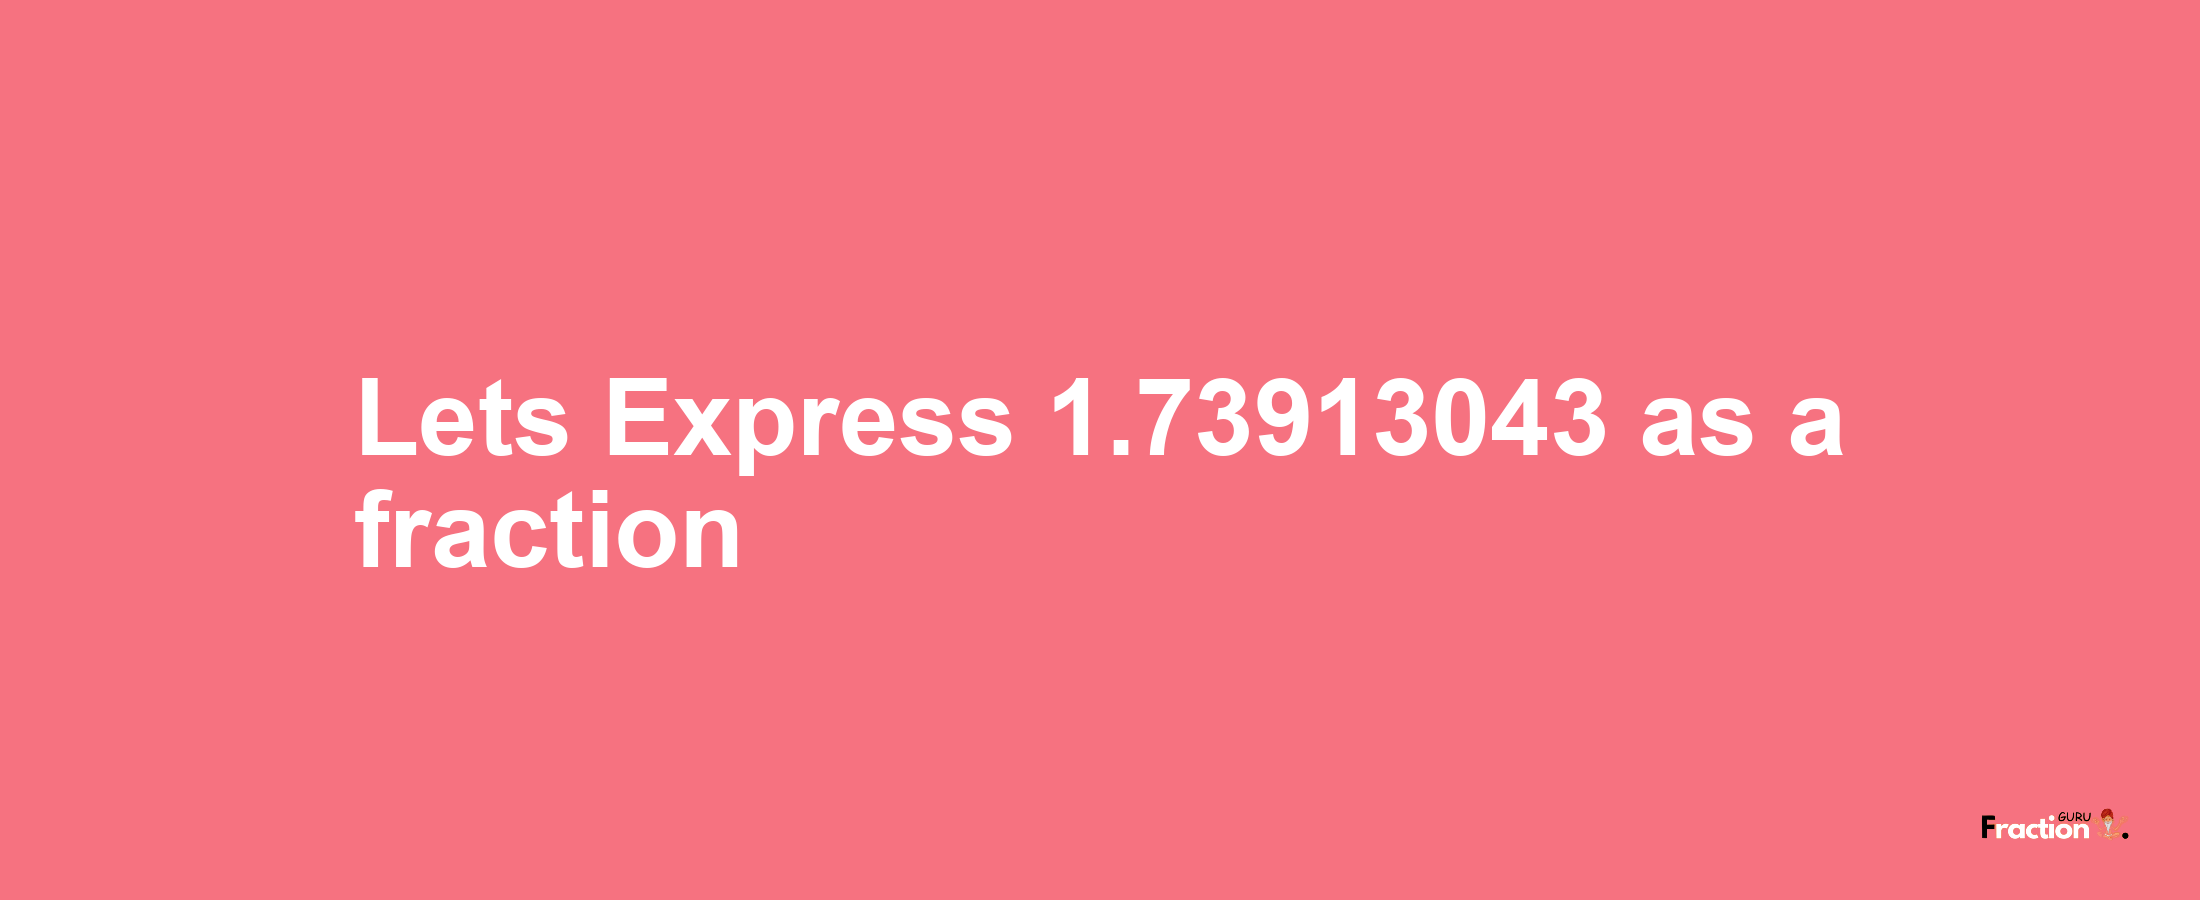 Lets Express 1.73913043 as afraction